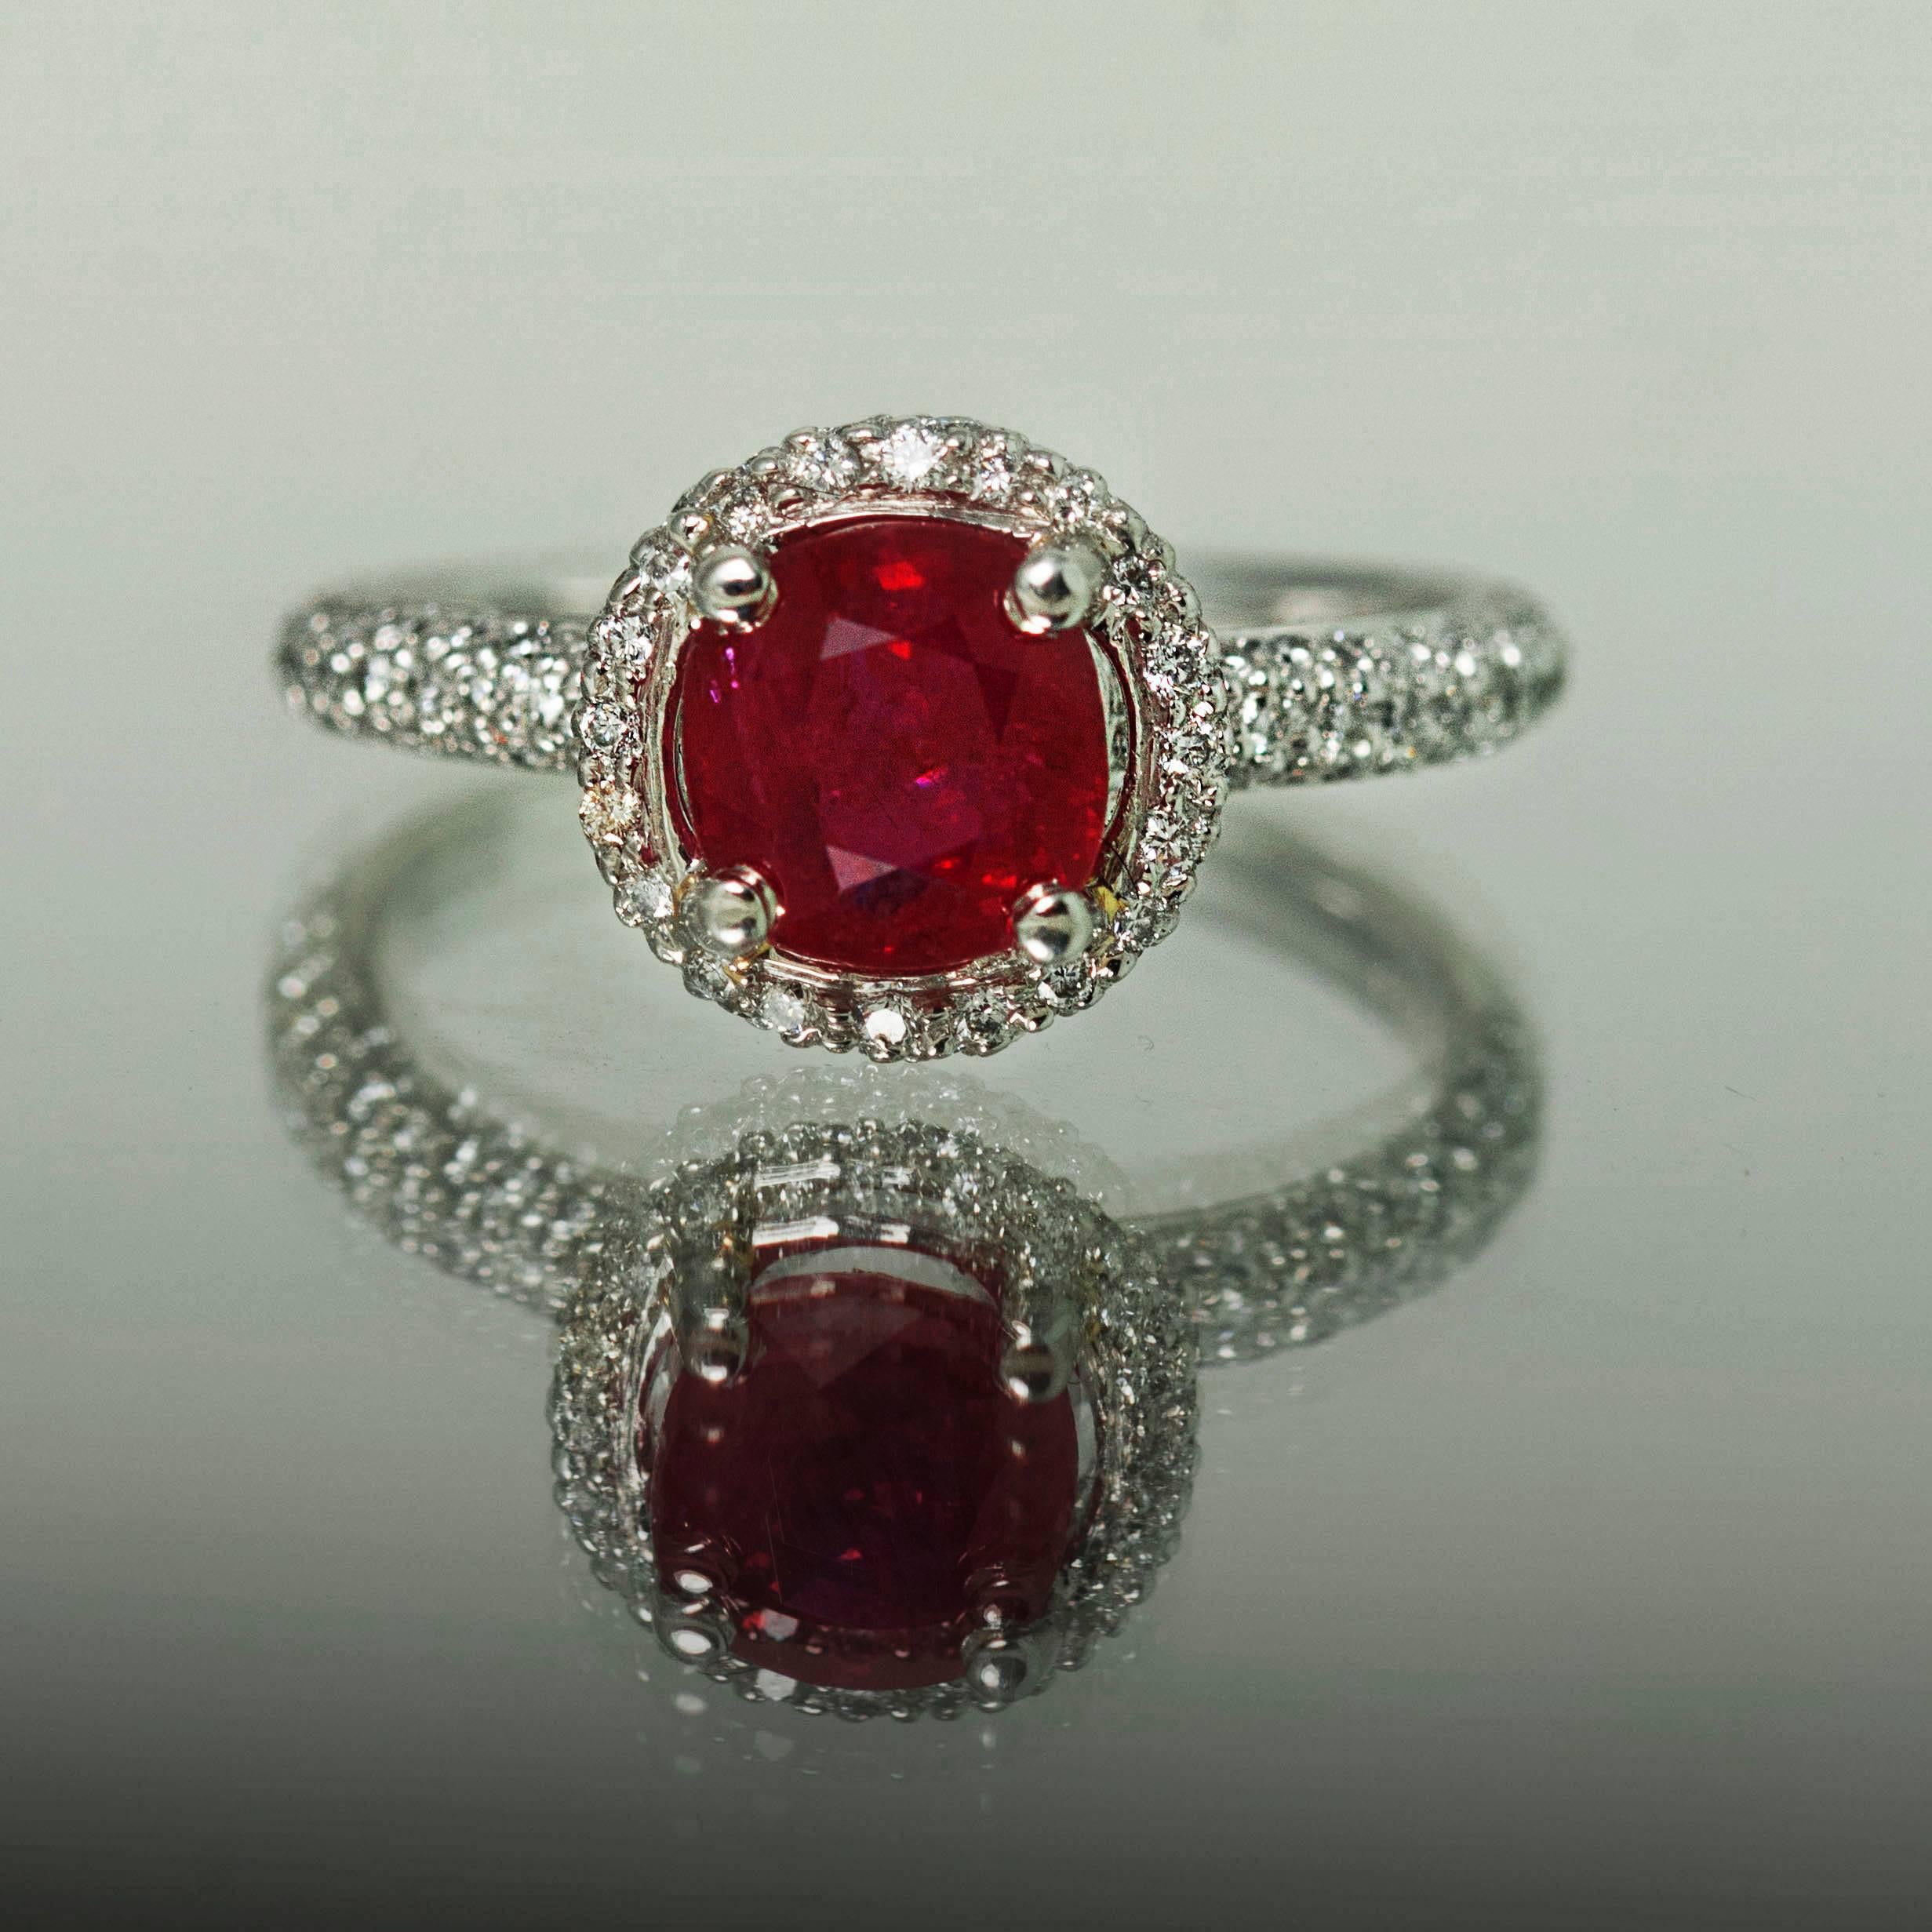 how much is a burmese ruby worth